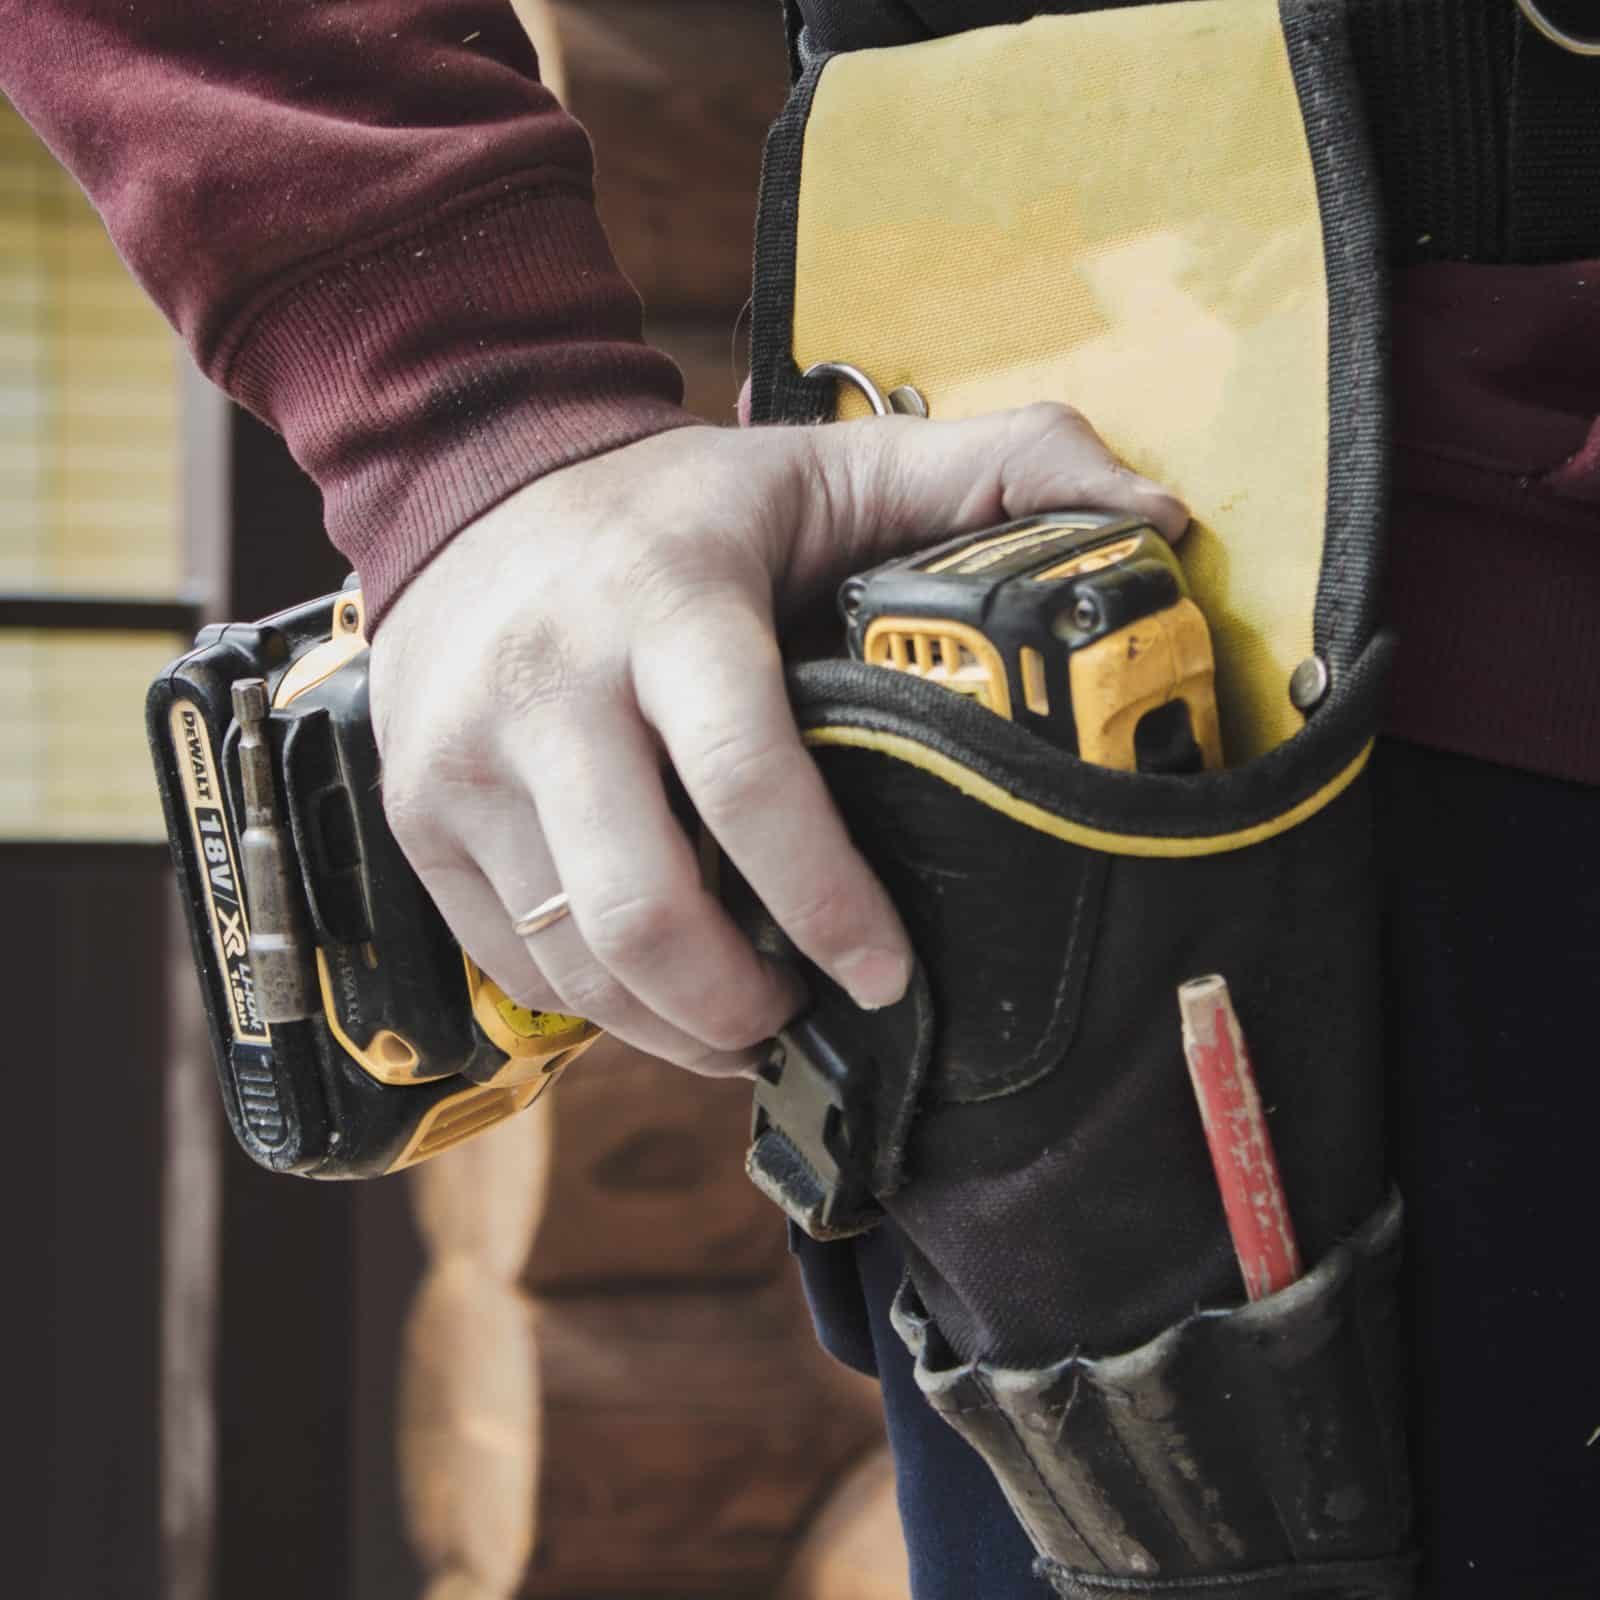 Second image highlighting an individual holding a power drill for the 24/7 emergency boarding section